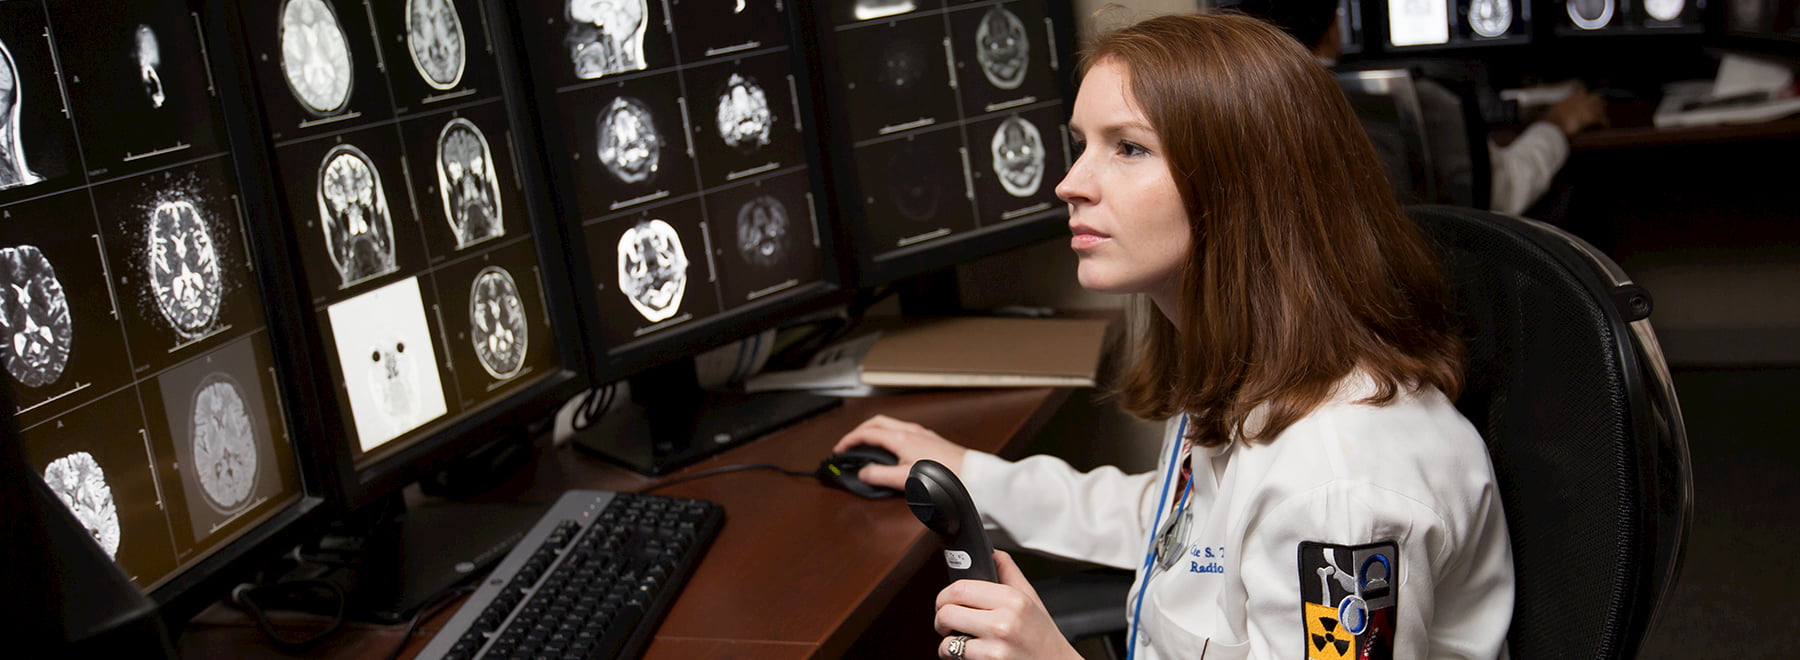 Seated female radiologist reviews images of the human brain on several computer screens.